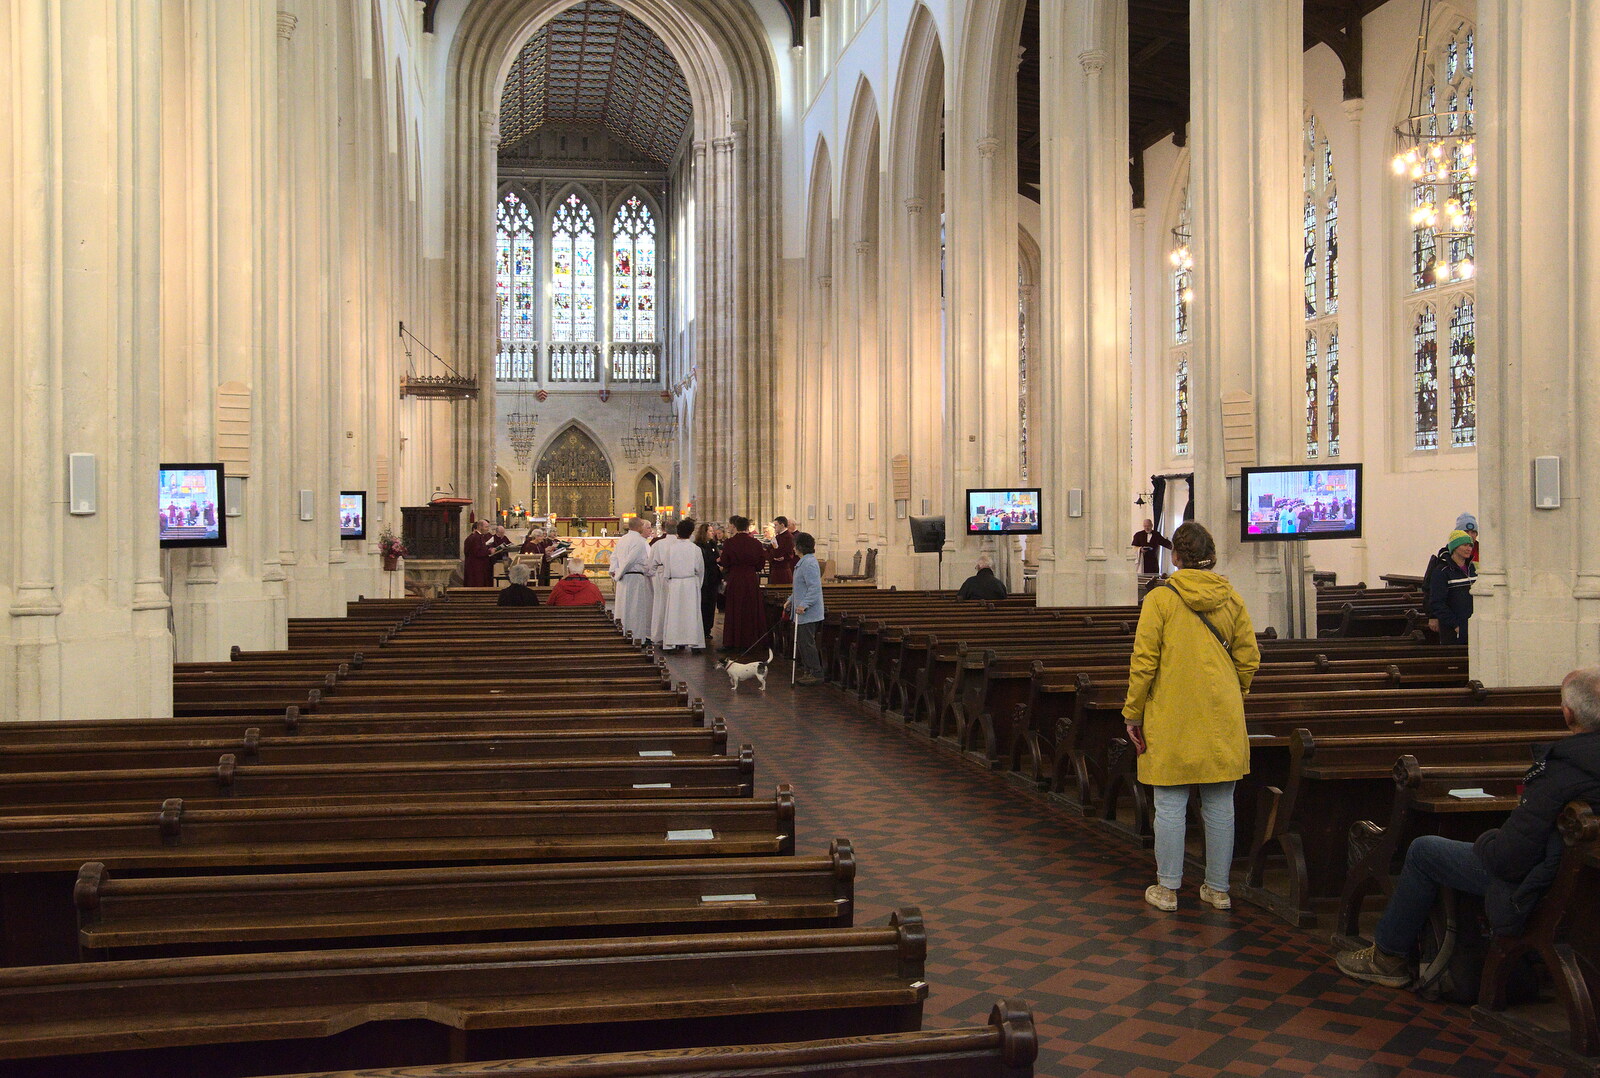 Pizza and Pasta in Bury St. Edmunds, Suffolk - 30th October 2022: We have a look inside the Cathedral